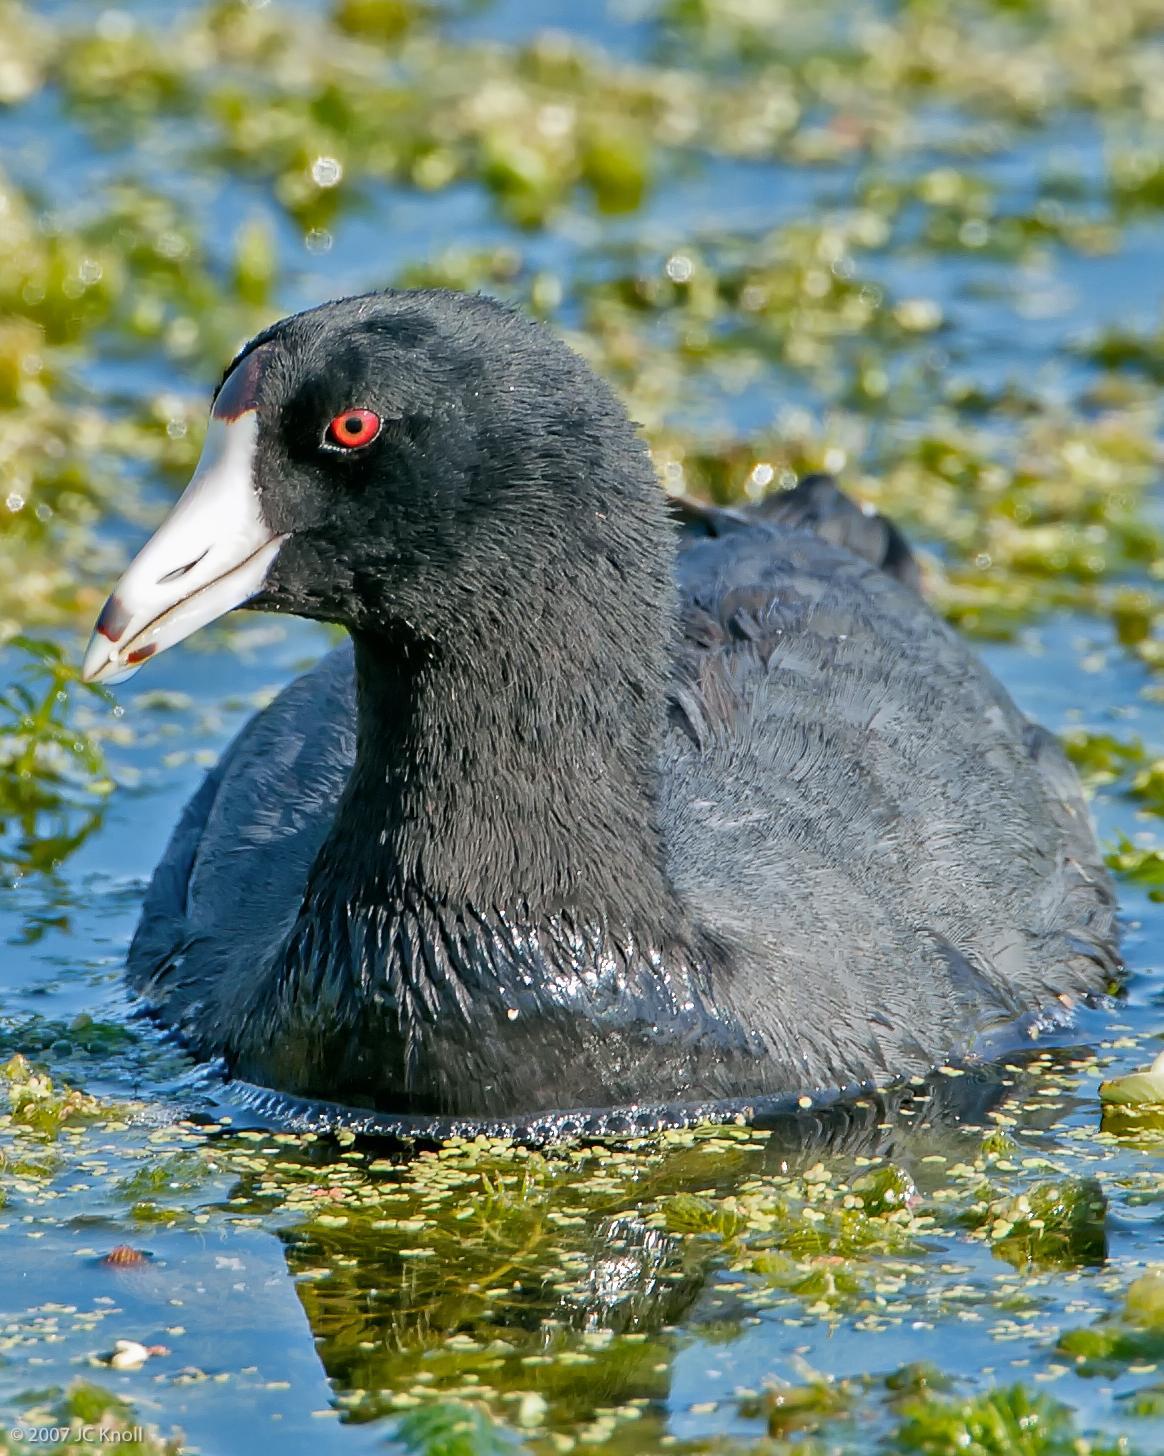 American Coot Photo by JC Knoll